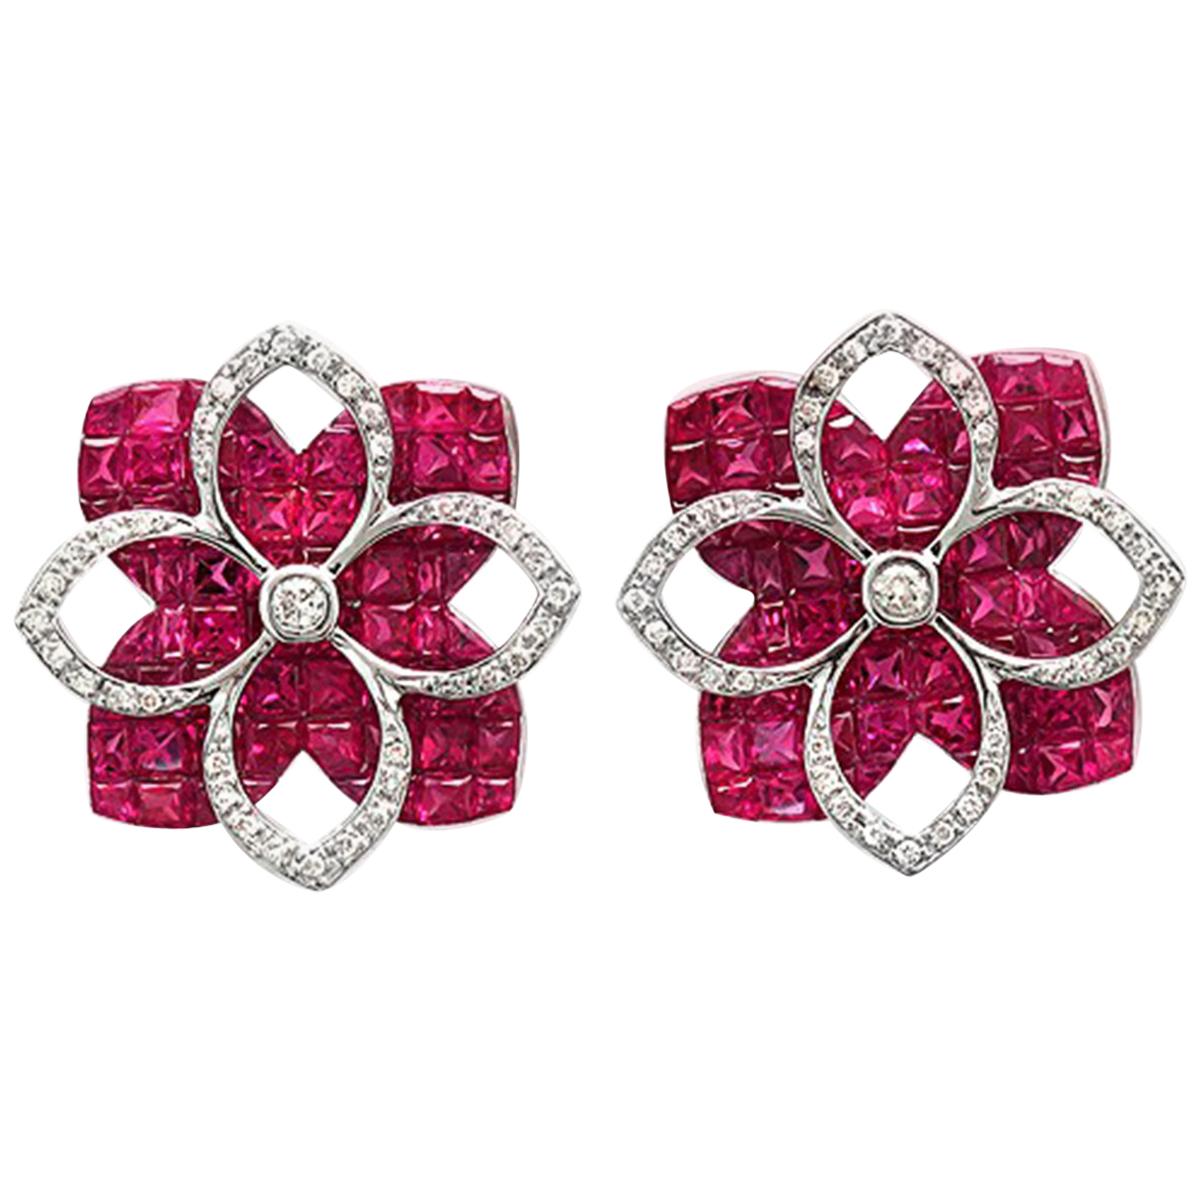 18 Karat White Gold 0.32 Carat Diamonds and Invisible 9.86 Carat Ruby Earrings